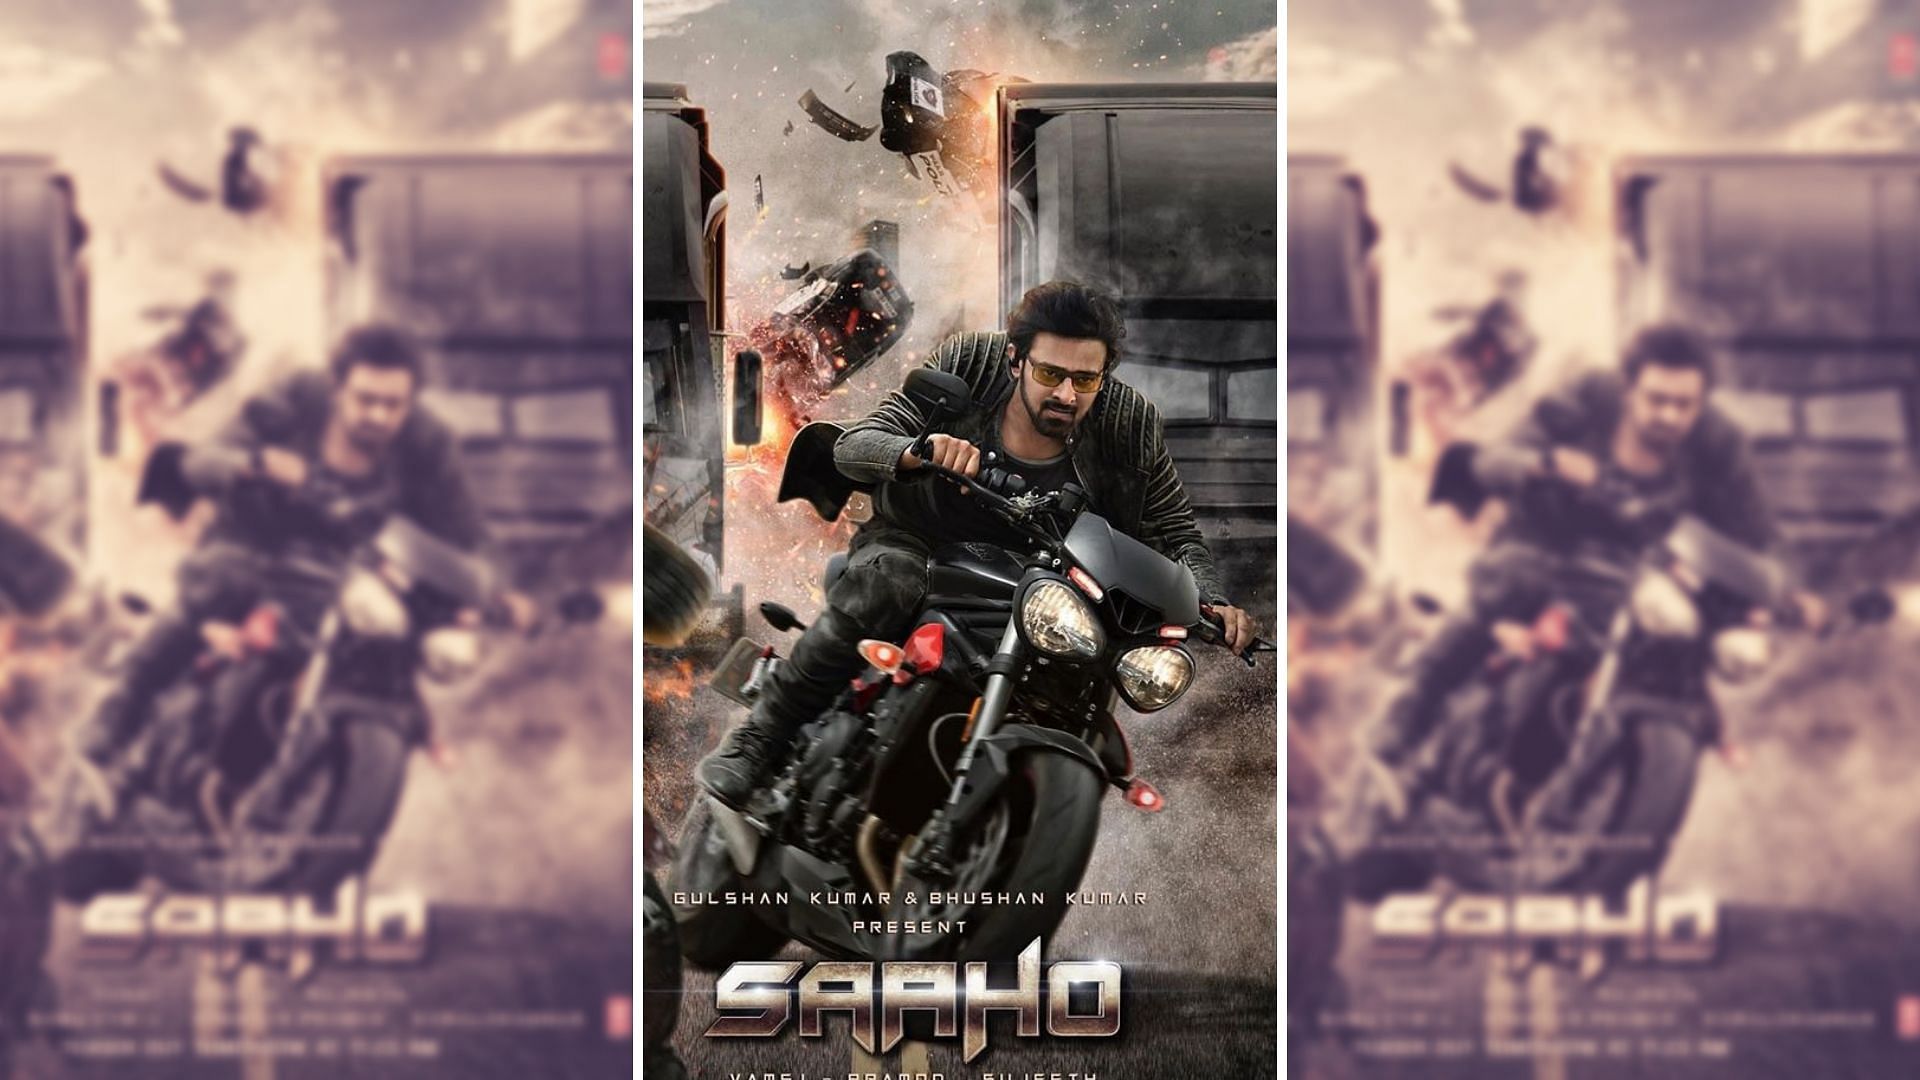 Prabhas in a poster for action-thriller <i>Saaho</i>.